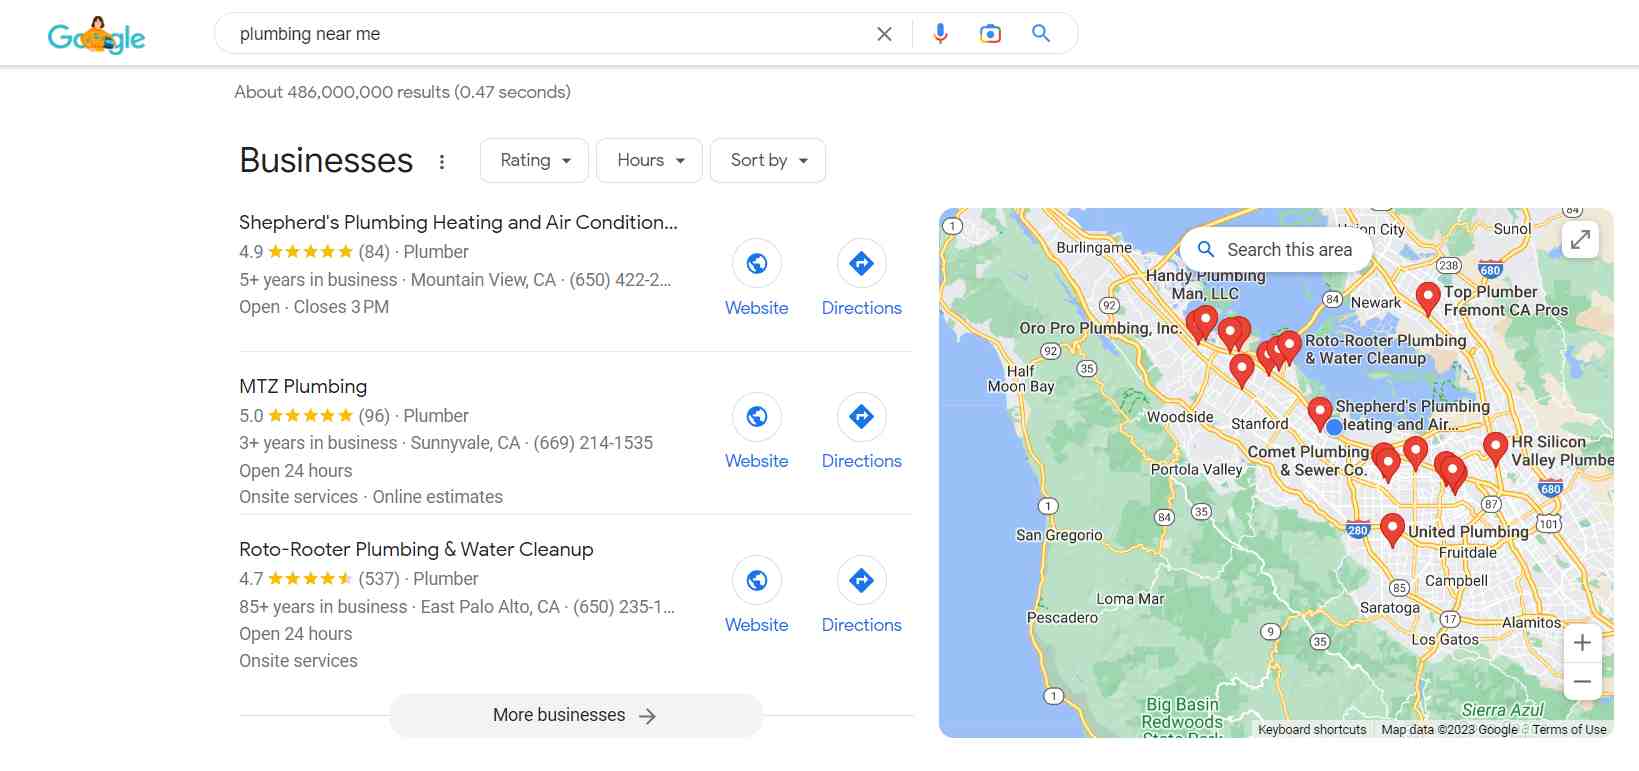 Google My Business listing for plumbers near me